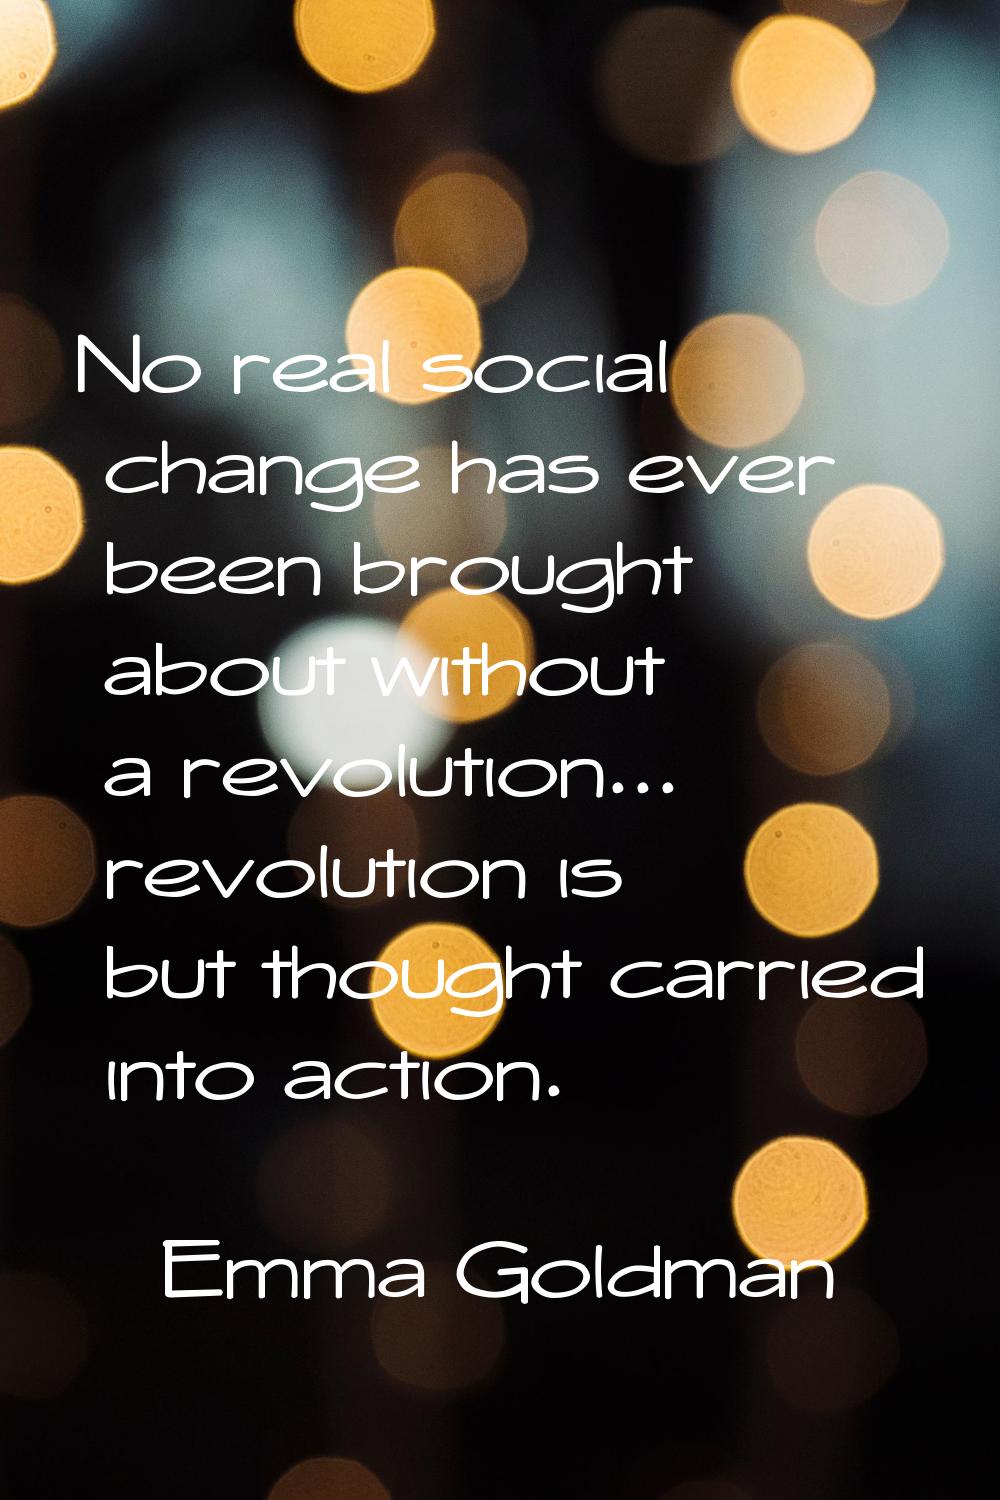 No real social change has ever been brought about without a revolution... revolution is but thought